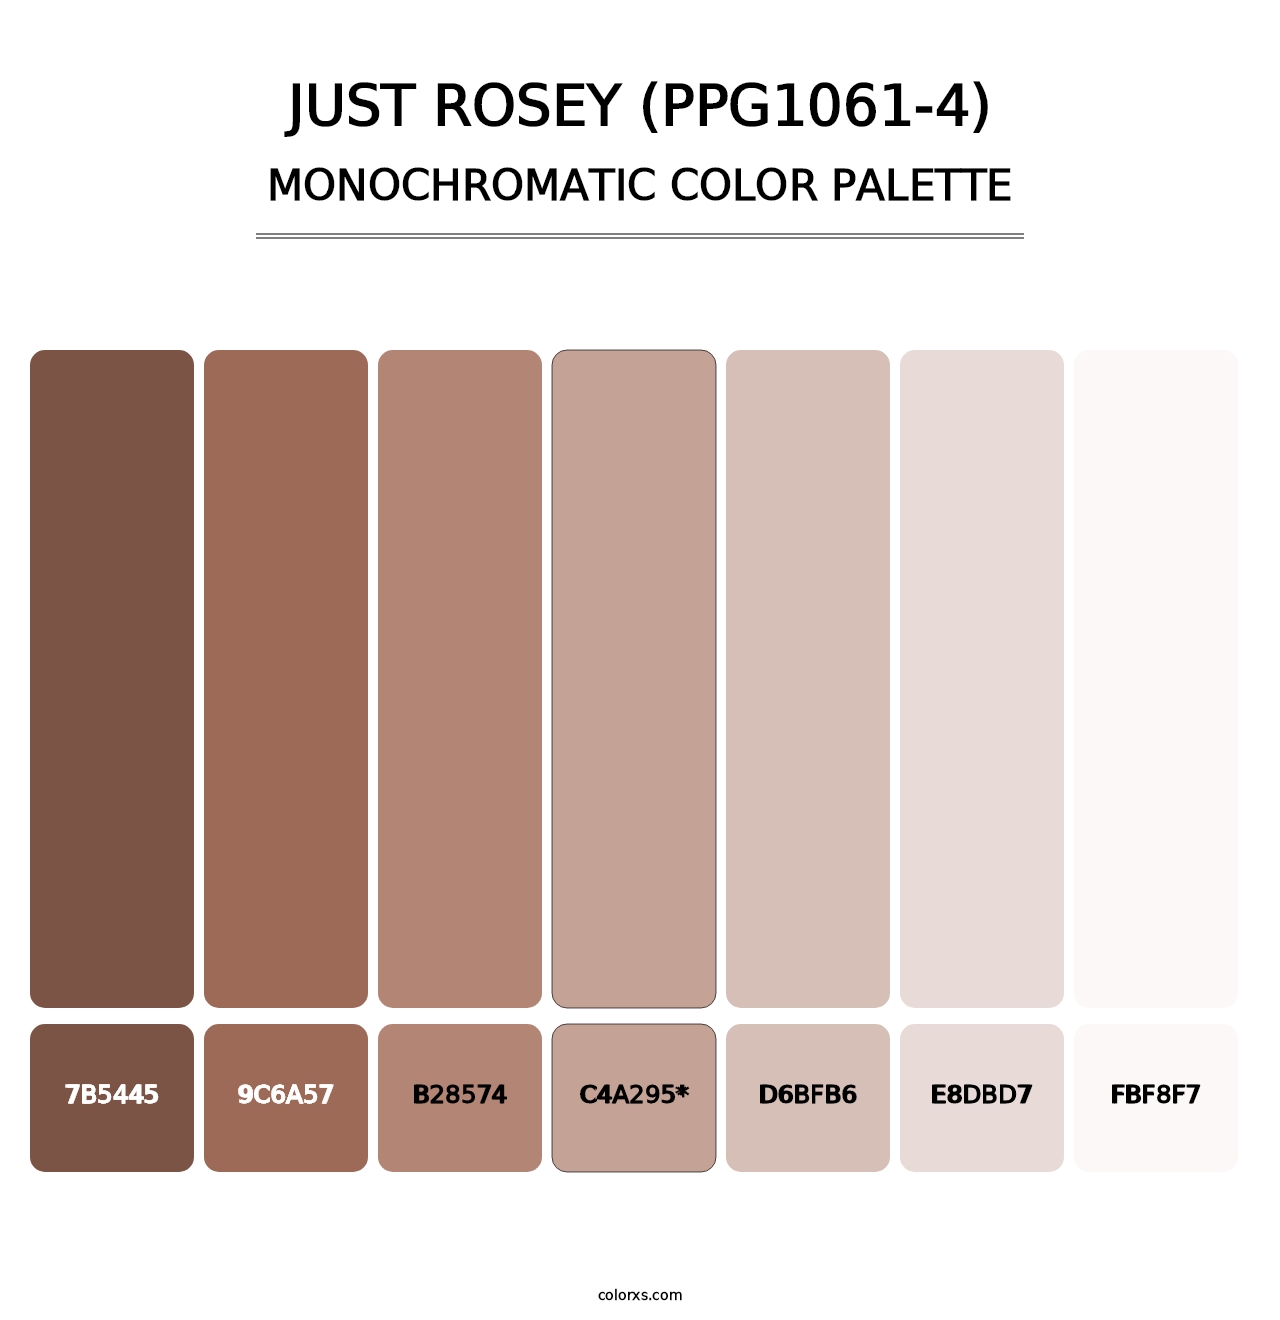 Just Rosey (PPG1061-4) - Monochromatic Color Palette